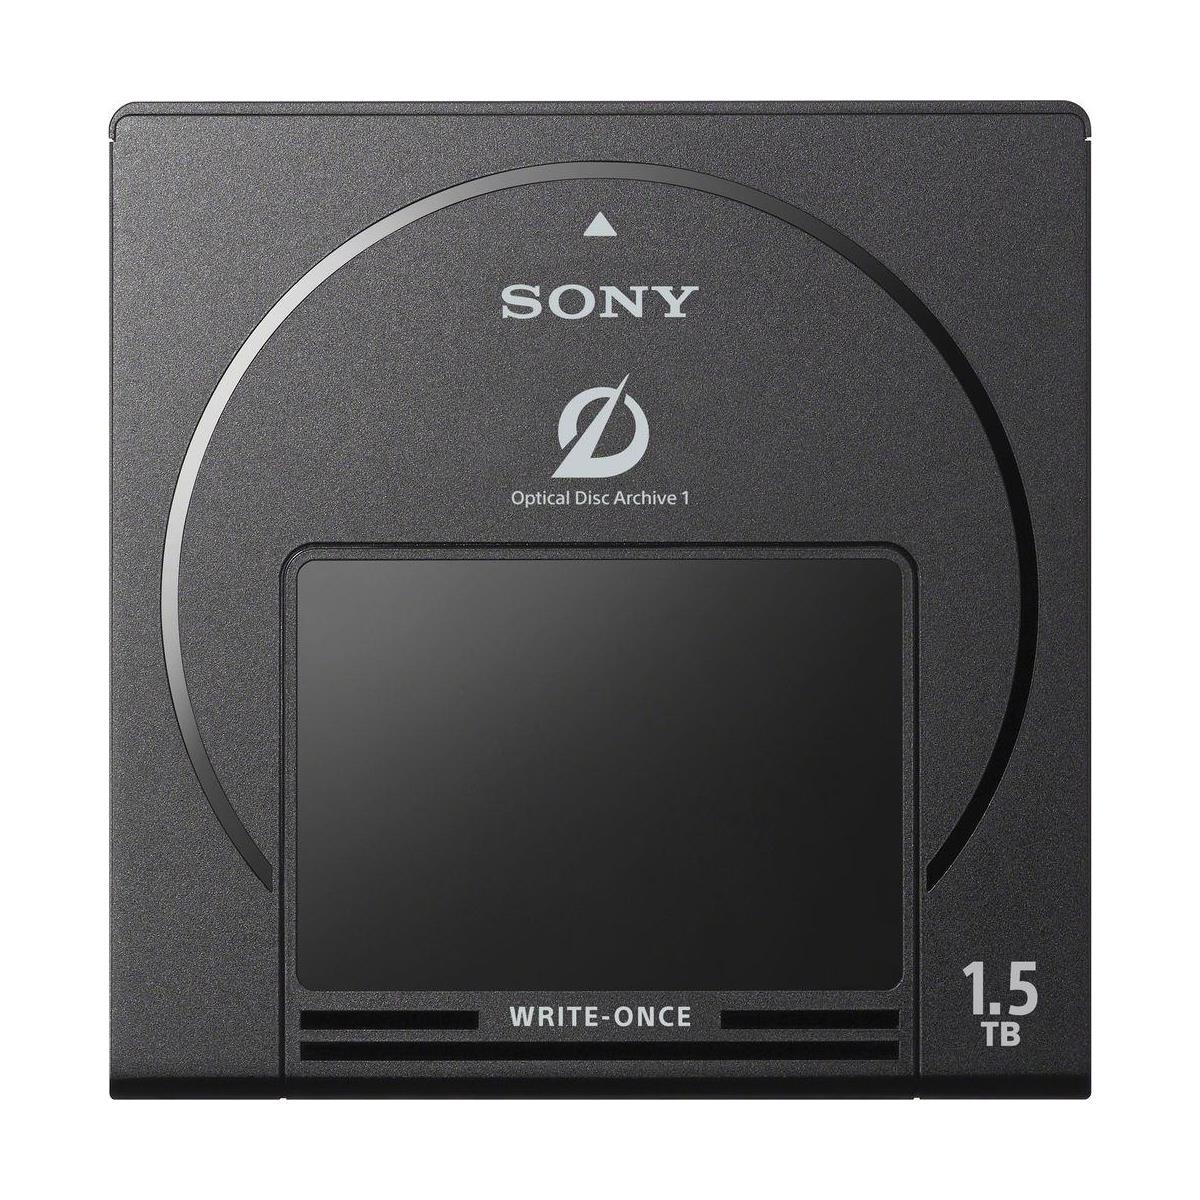 Image of Sony 1.5TB Write-Once Cartridge for ODS-D55U and ODS-D77U Optical Disc